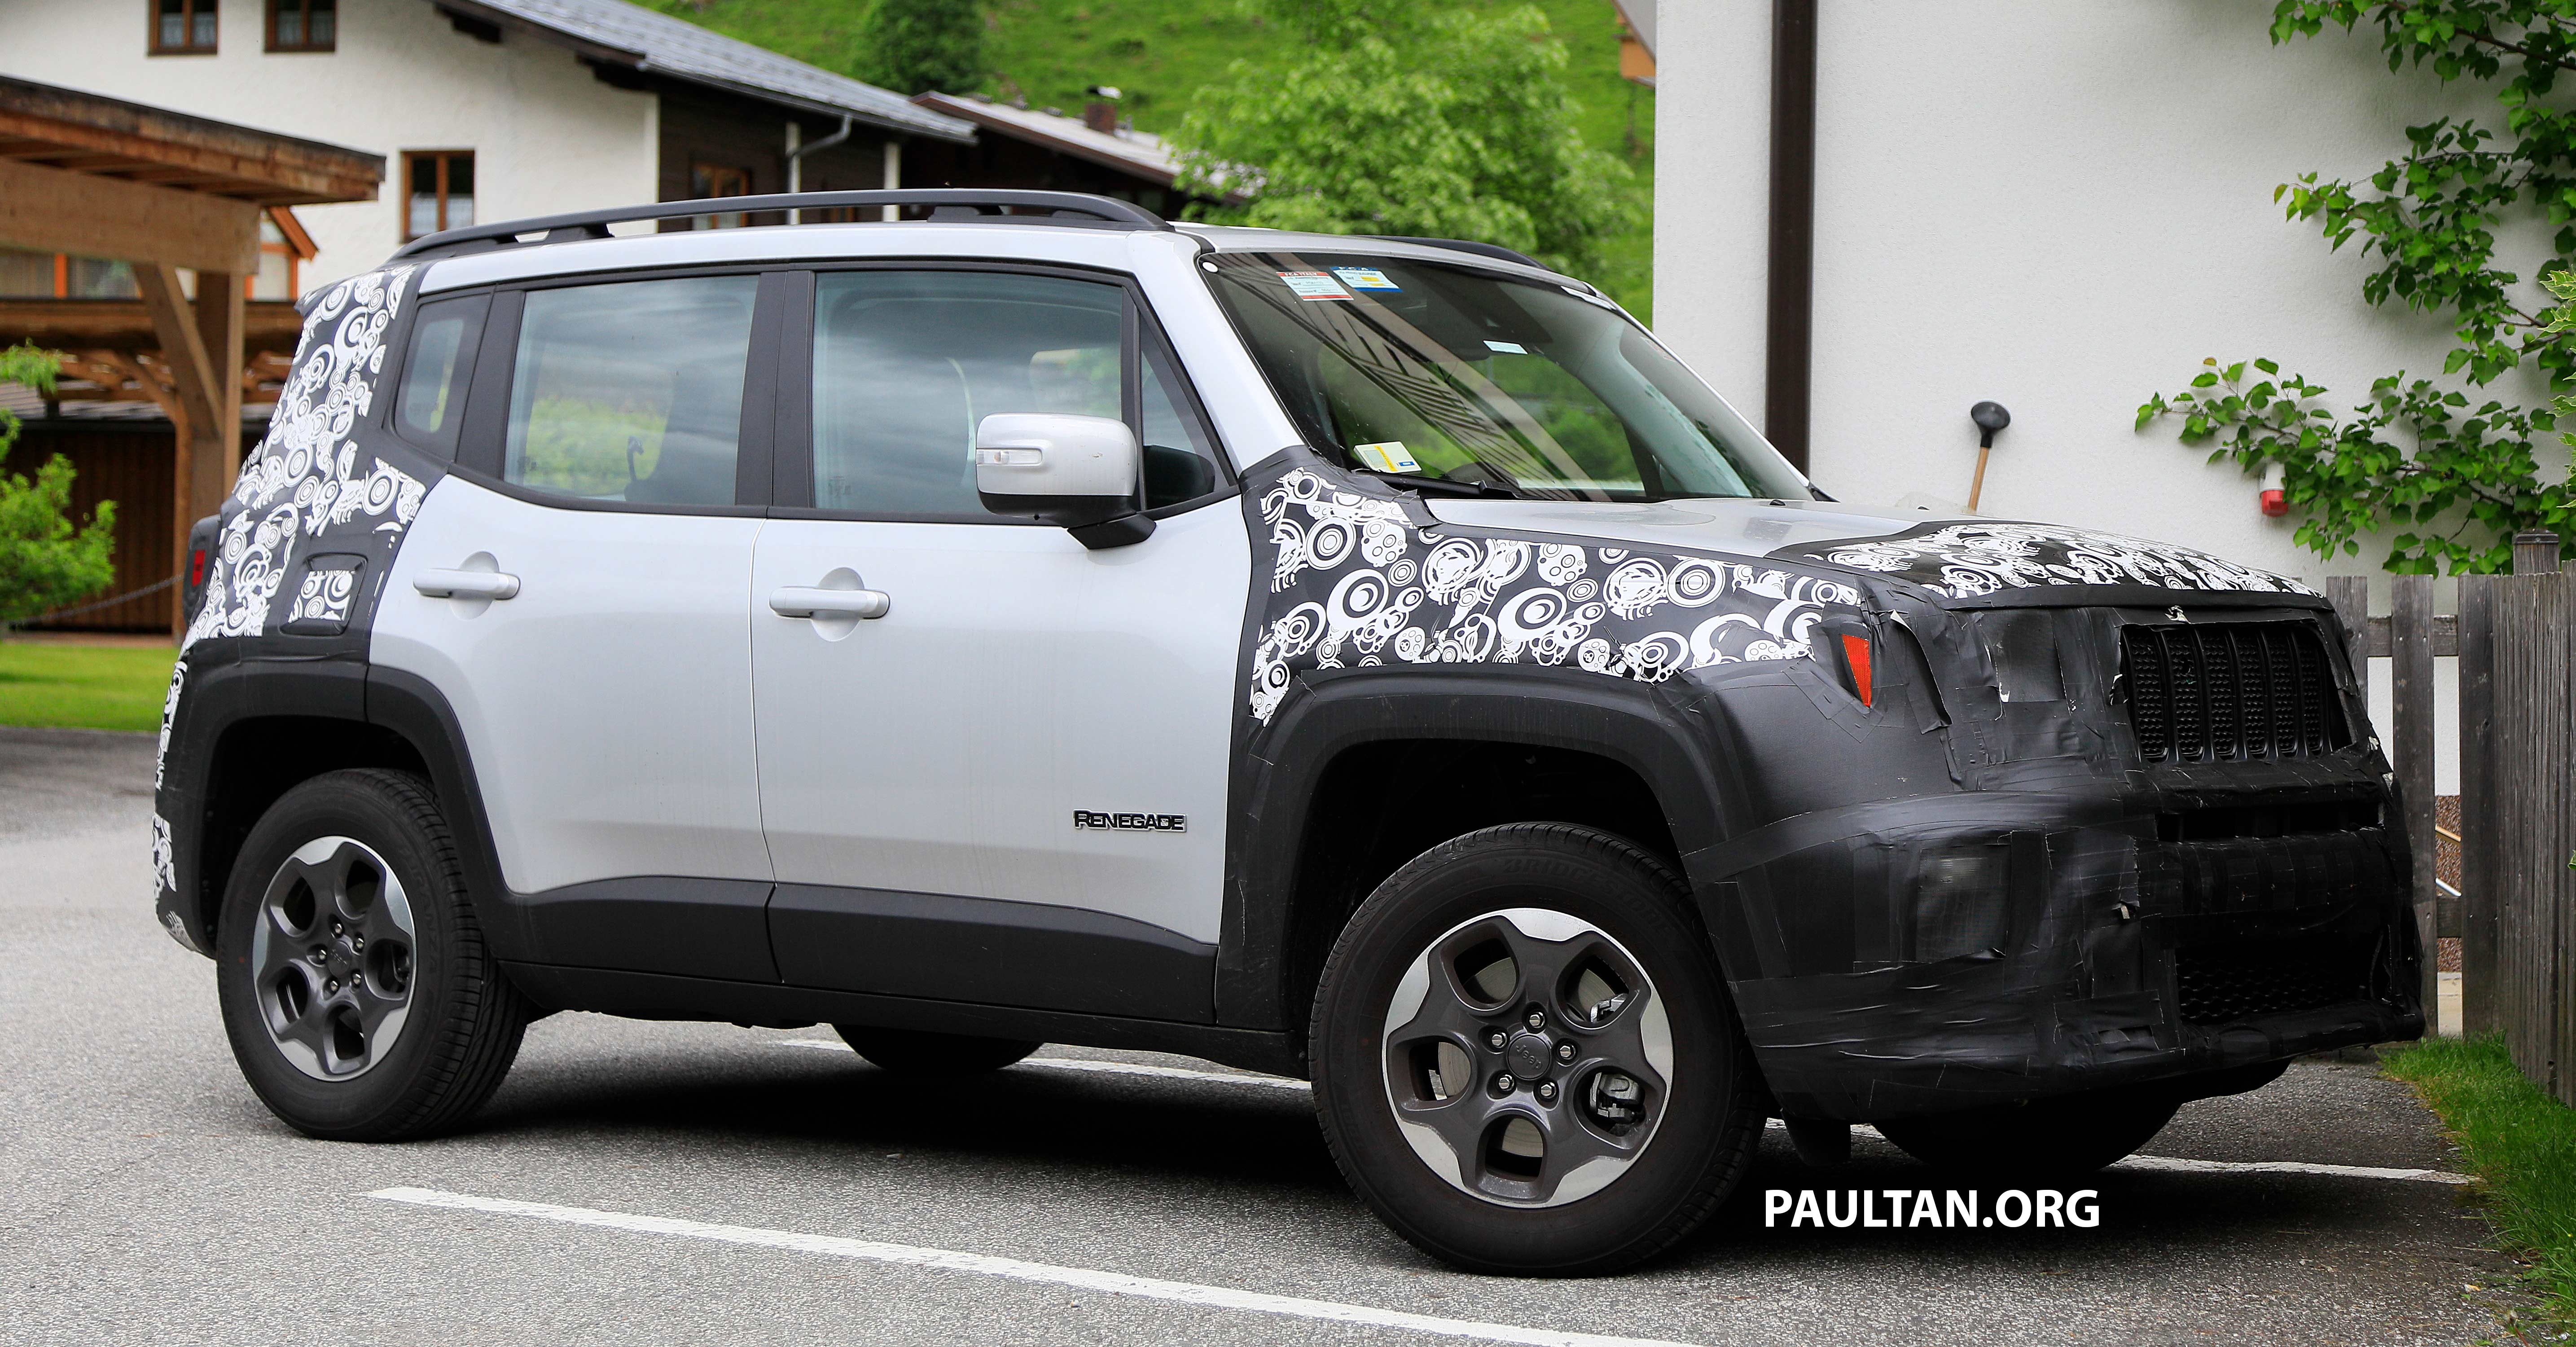 SPYSHOTS: Jeep Renegade facelift spotted testing Jeep-Renegade-Facelift ...